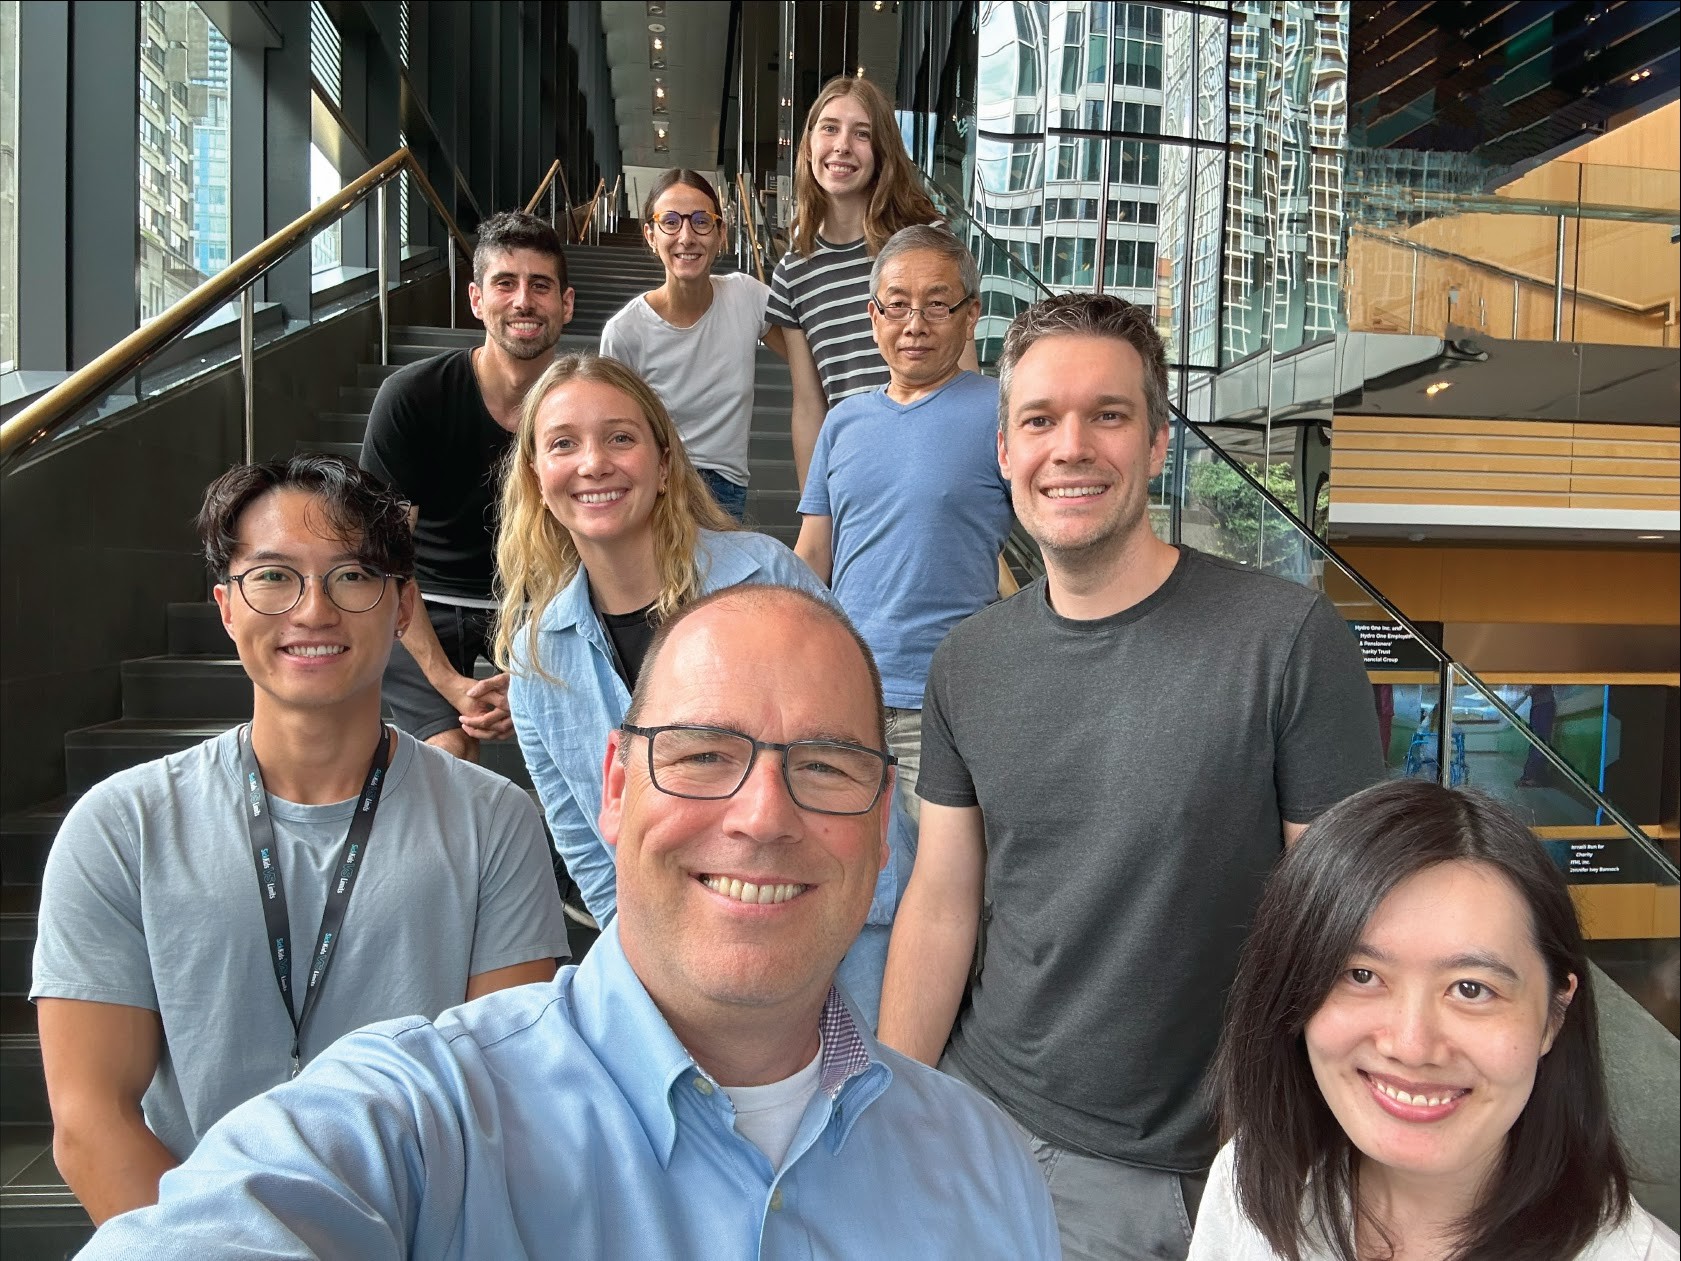 Group selfie of the Brumell lab.